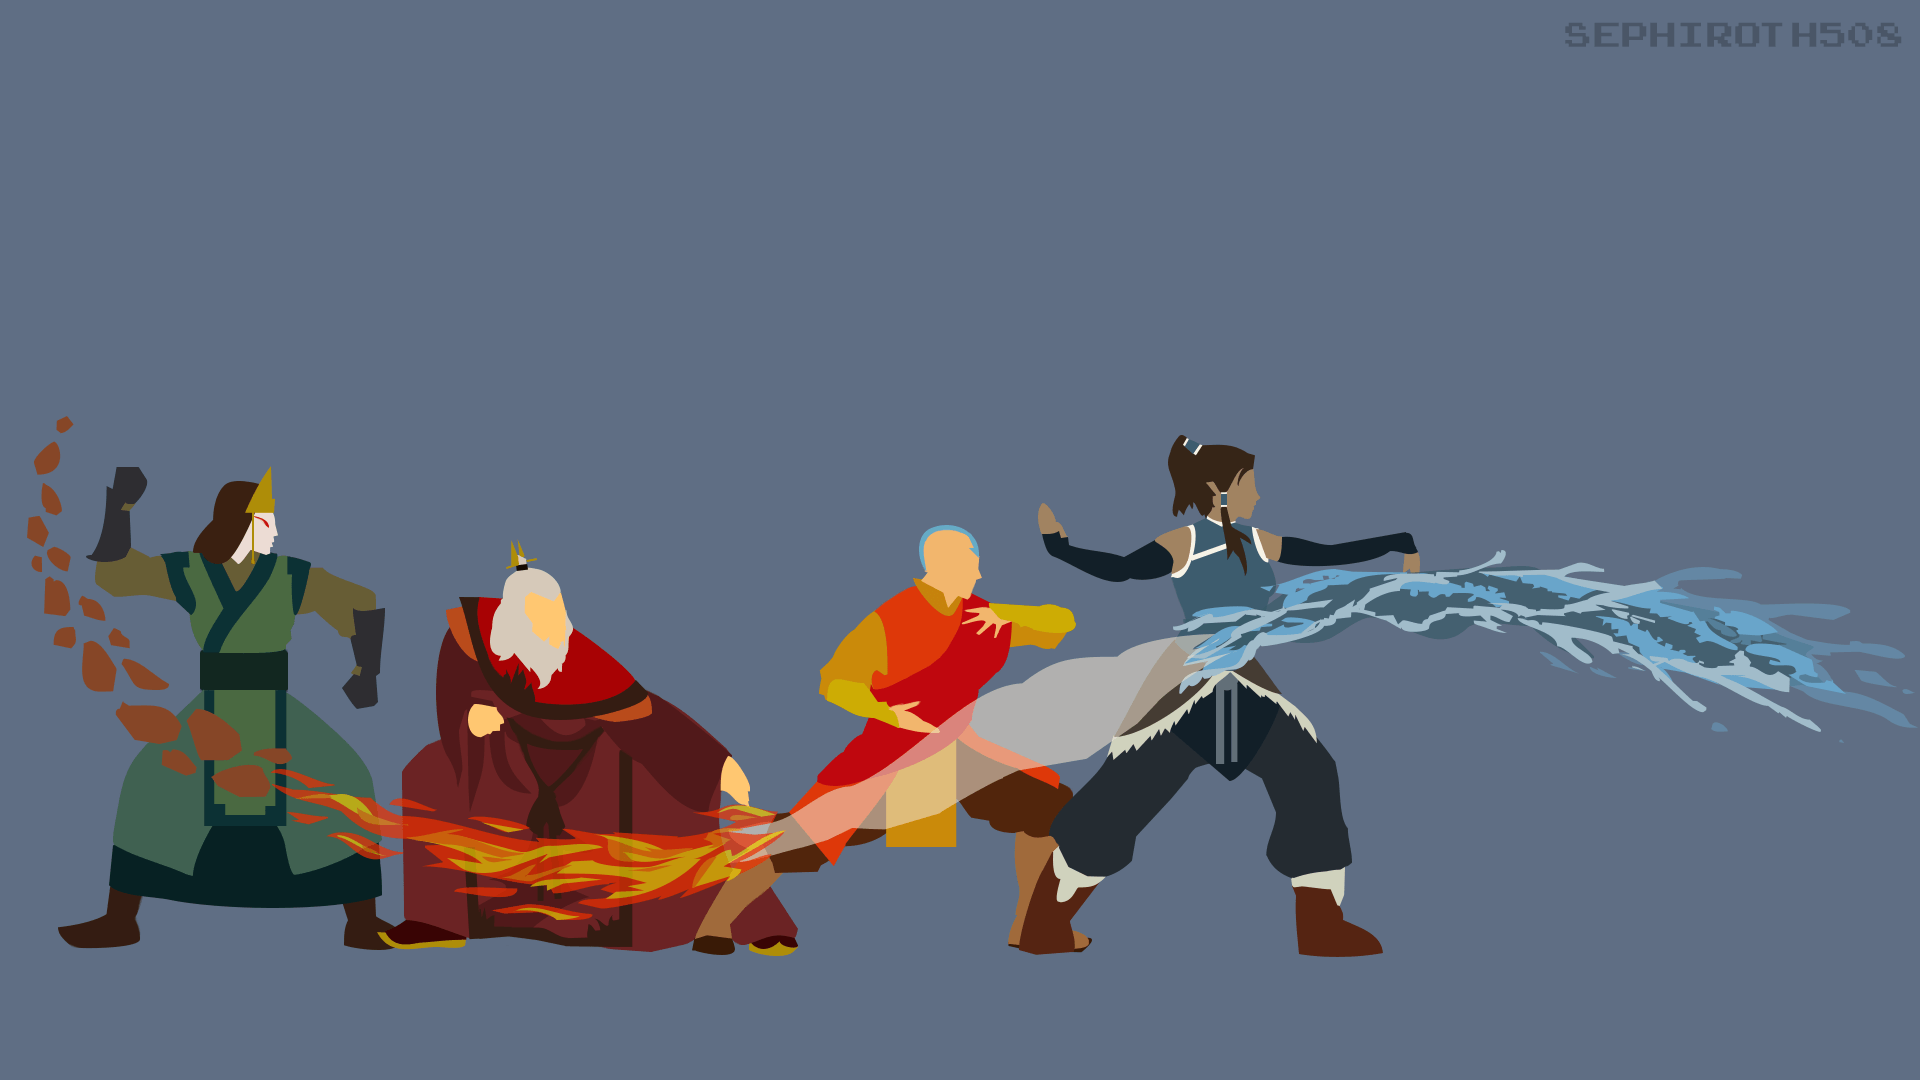 Made a minimalist wallpapers of the iconic Avatar quarta.